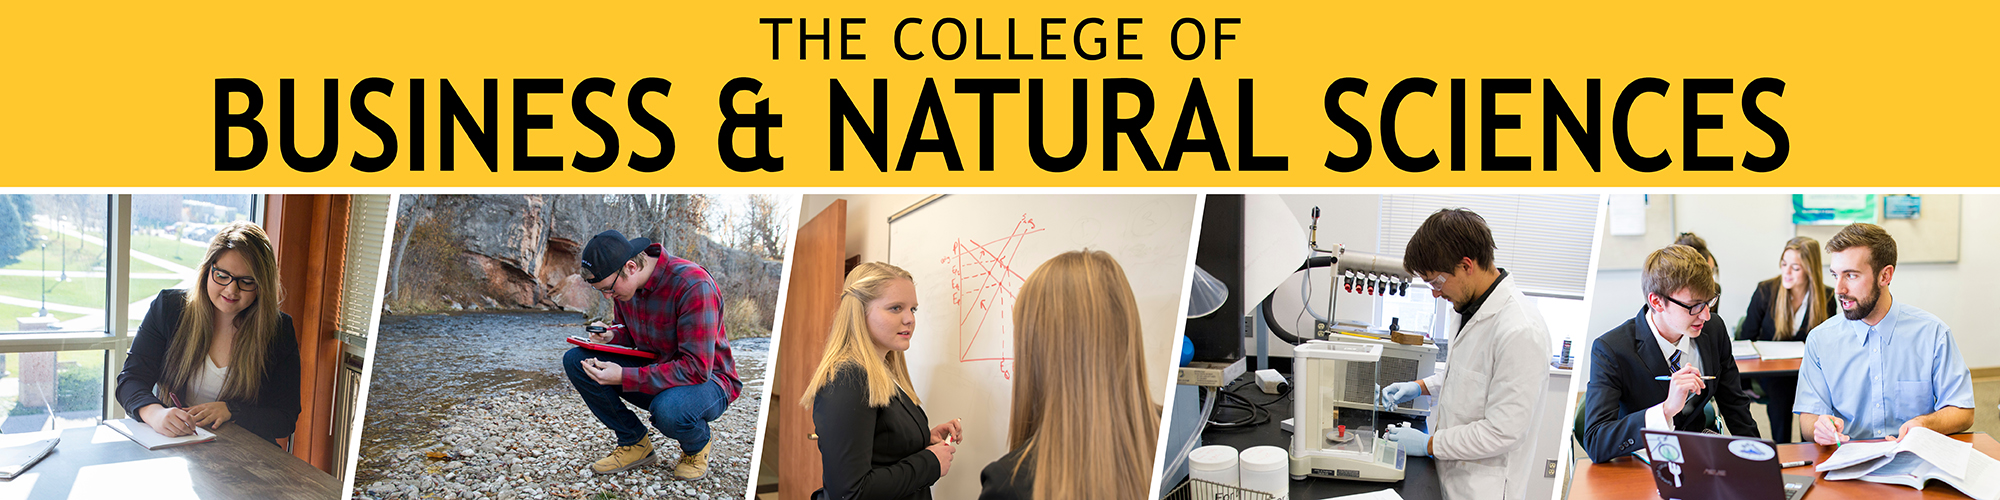 The College of Business and Natural Sciences Banner